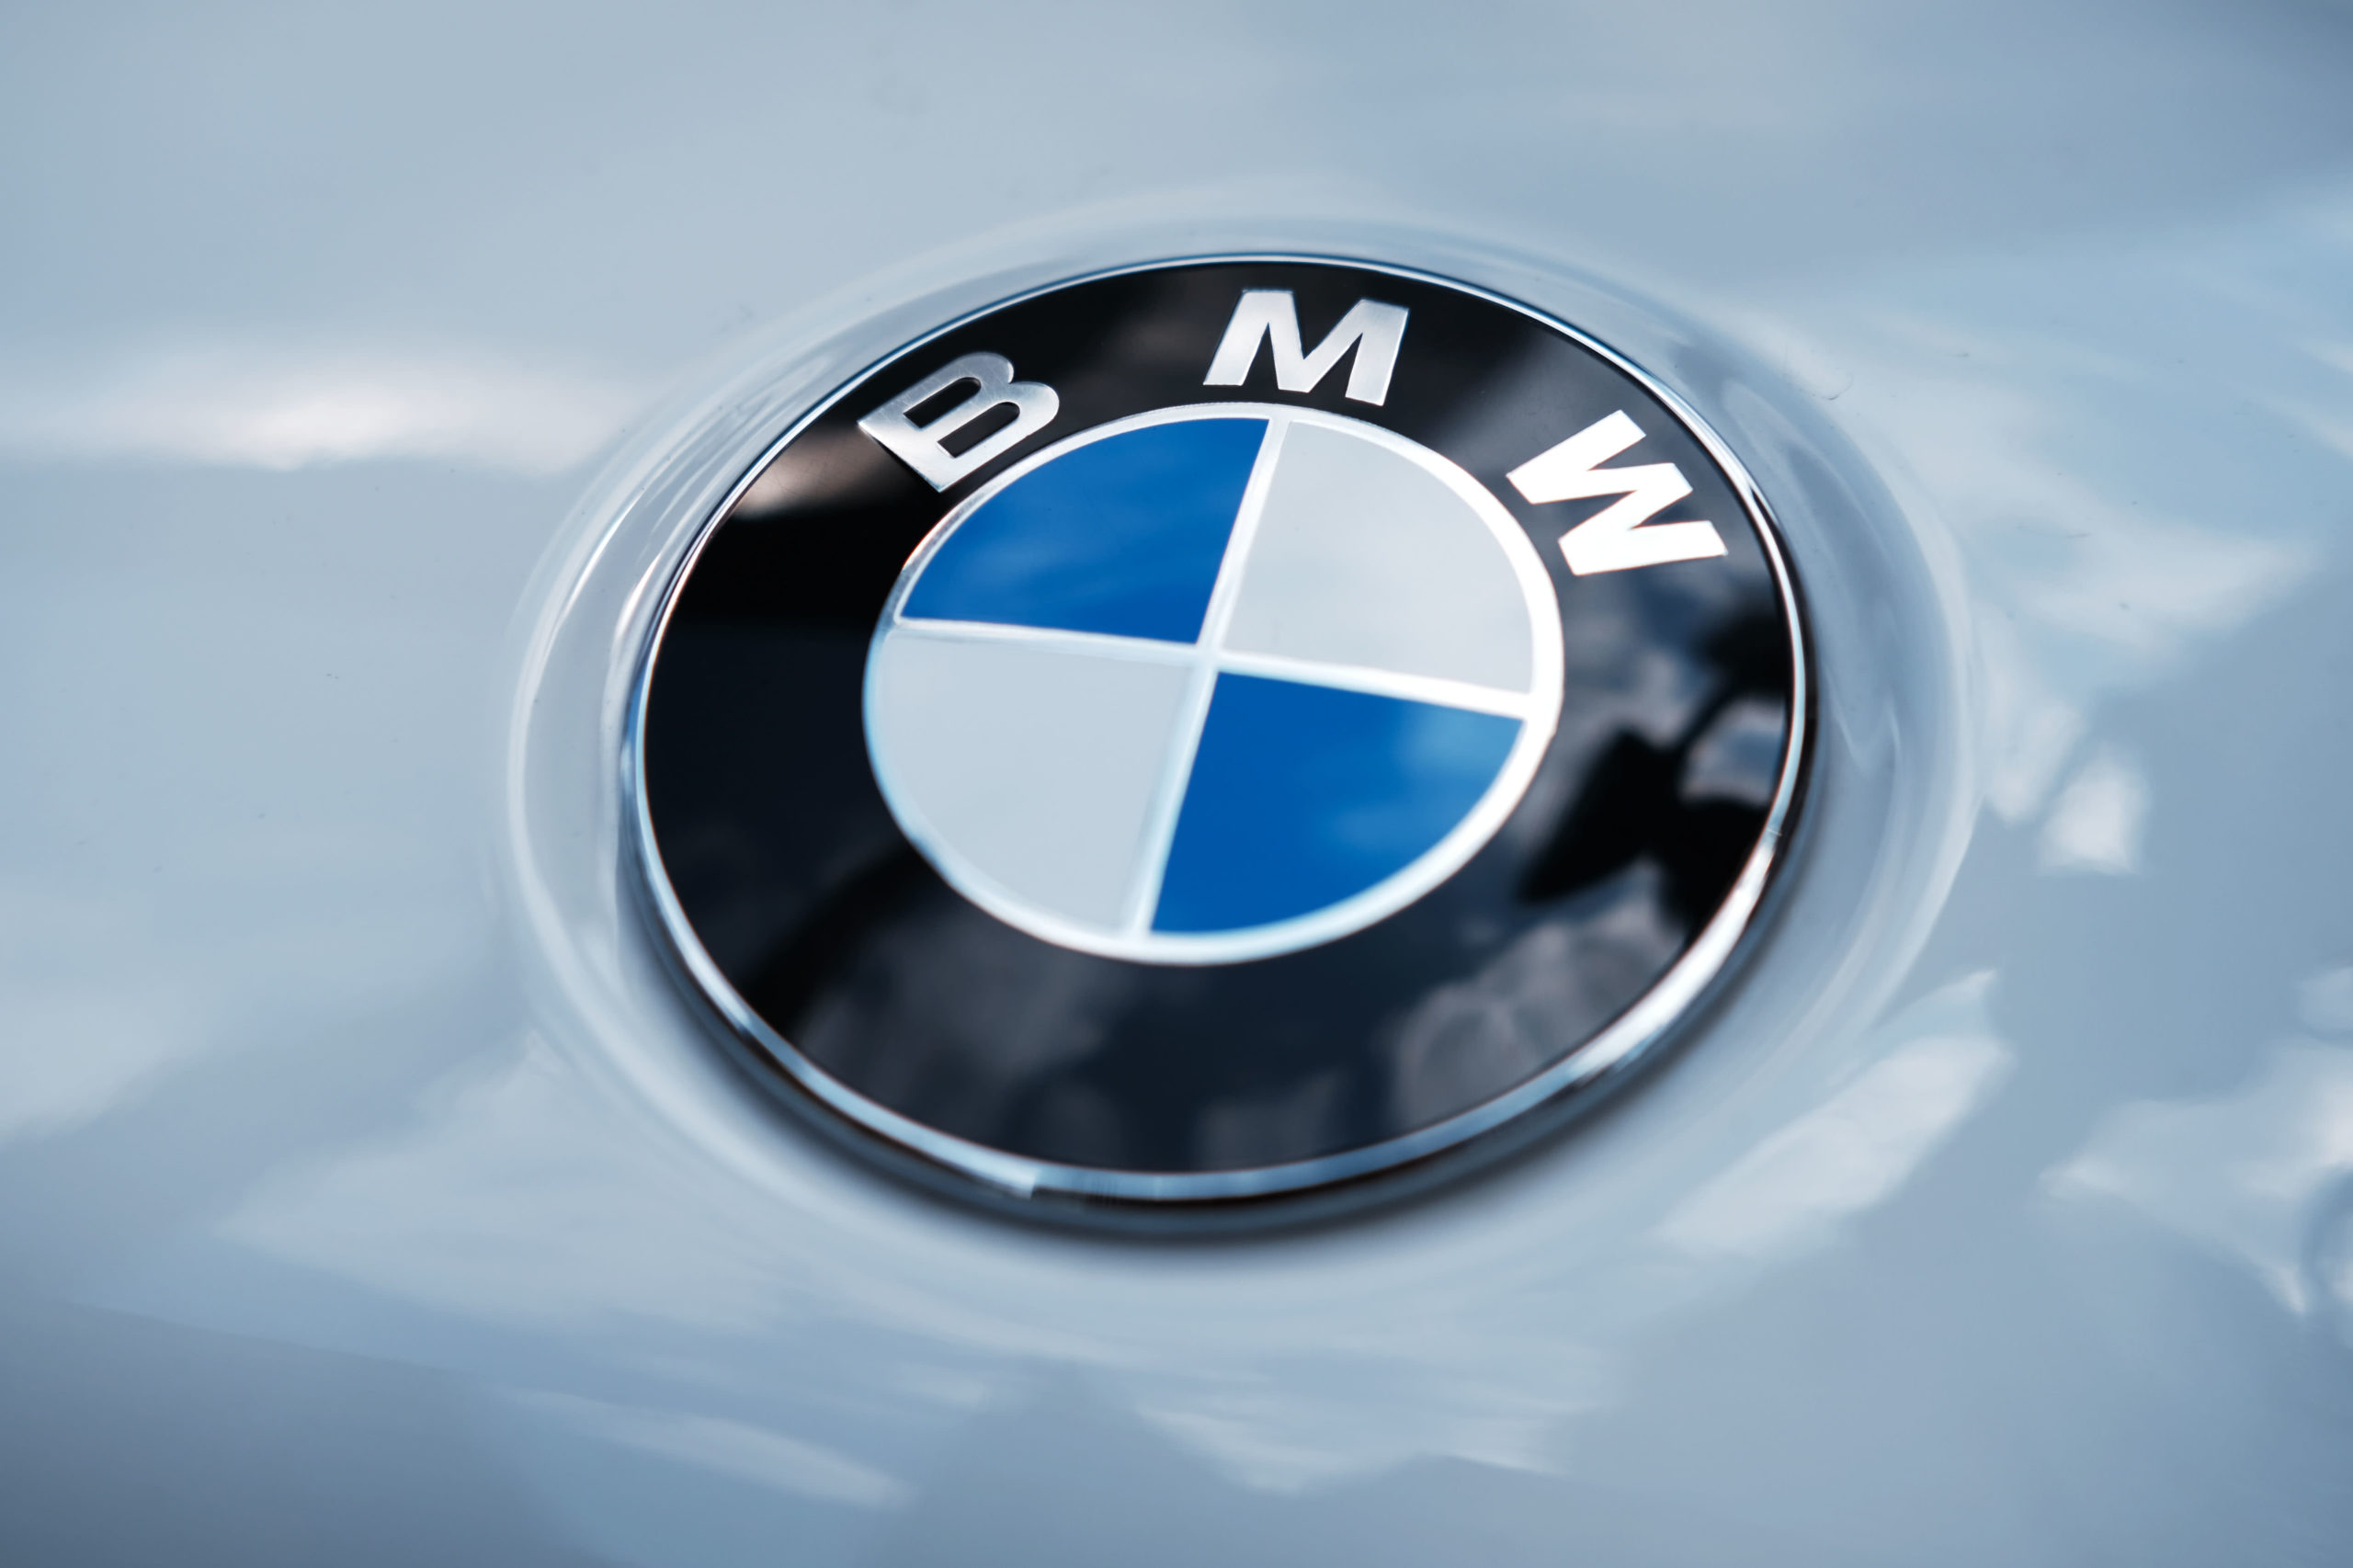 BMW says 2021 profit surged as it favored higher-margin vehicles during chip shortage